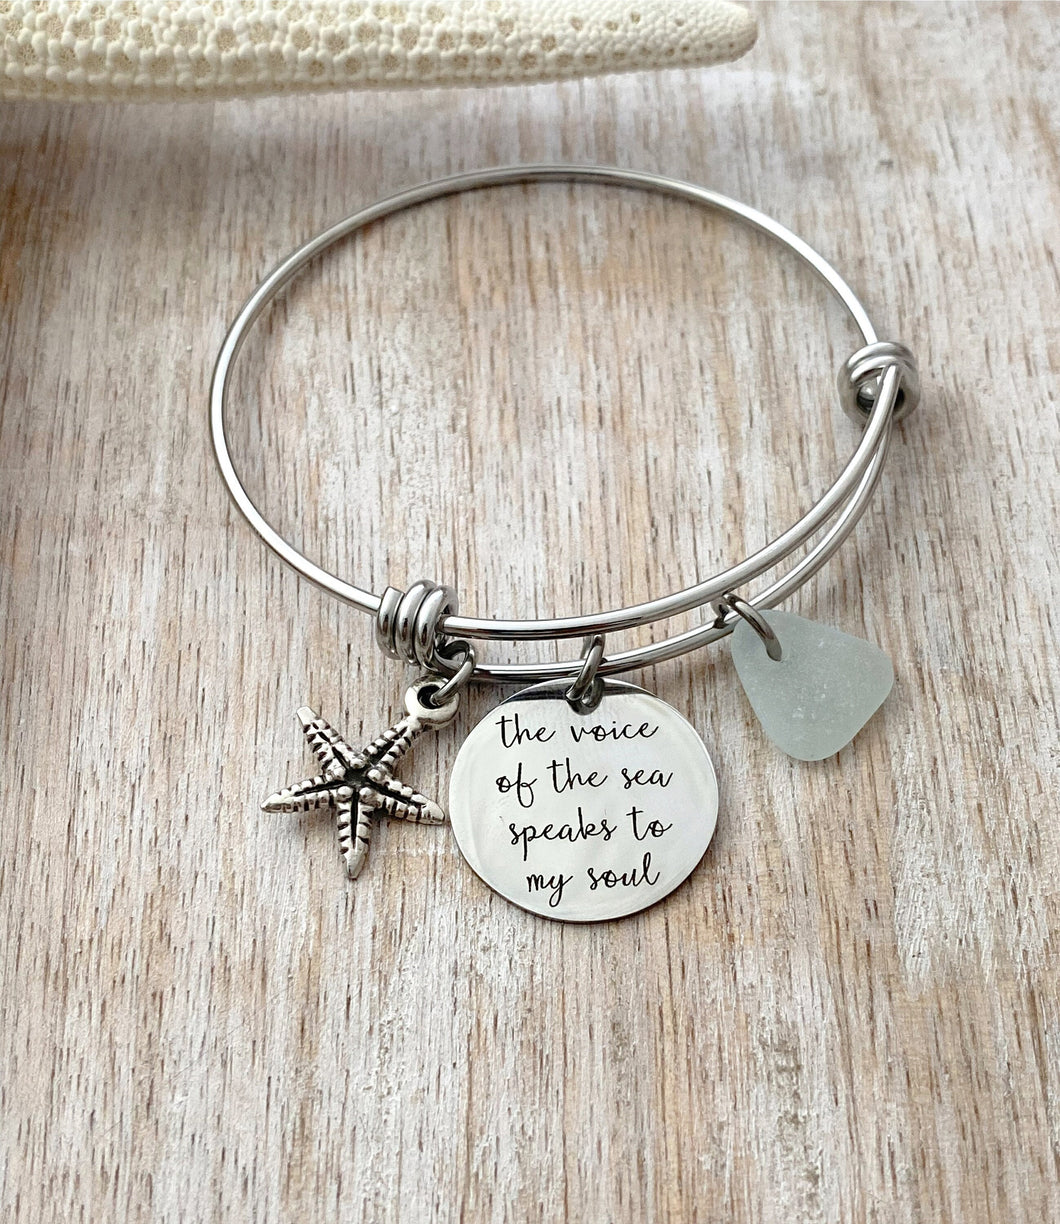 the voice of the sea speaks to my soul - stainless steel adjustable bangle bracelet - starfish charm genuine sea glass - Beach Quote Jewelry